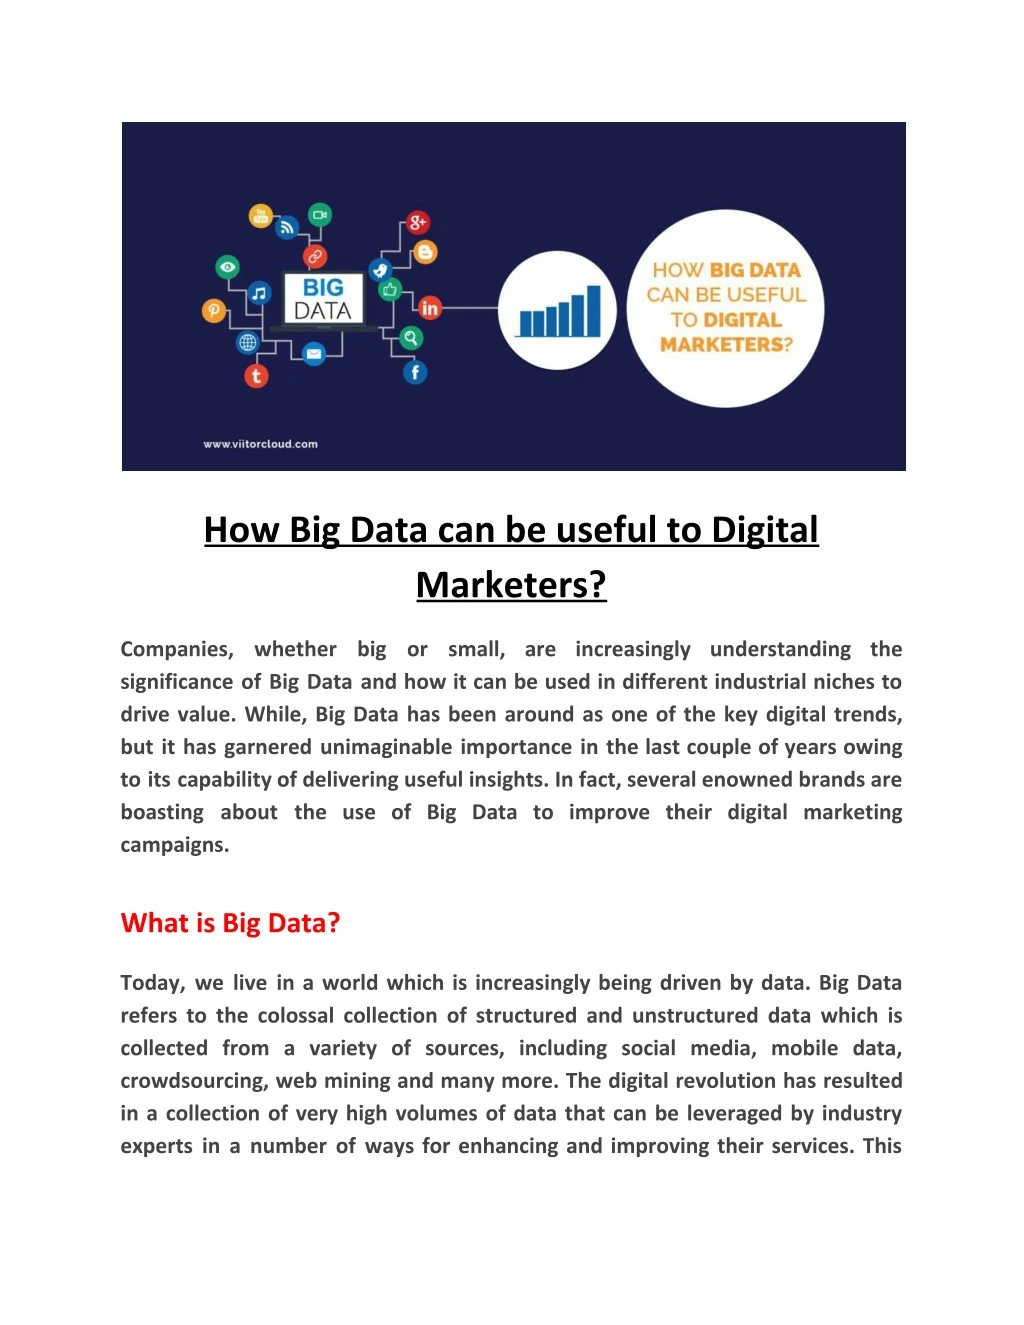 how big data can be useful to digital marketers